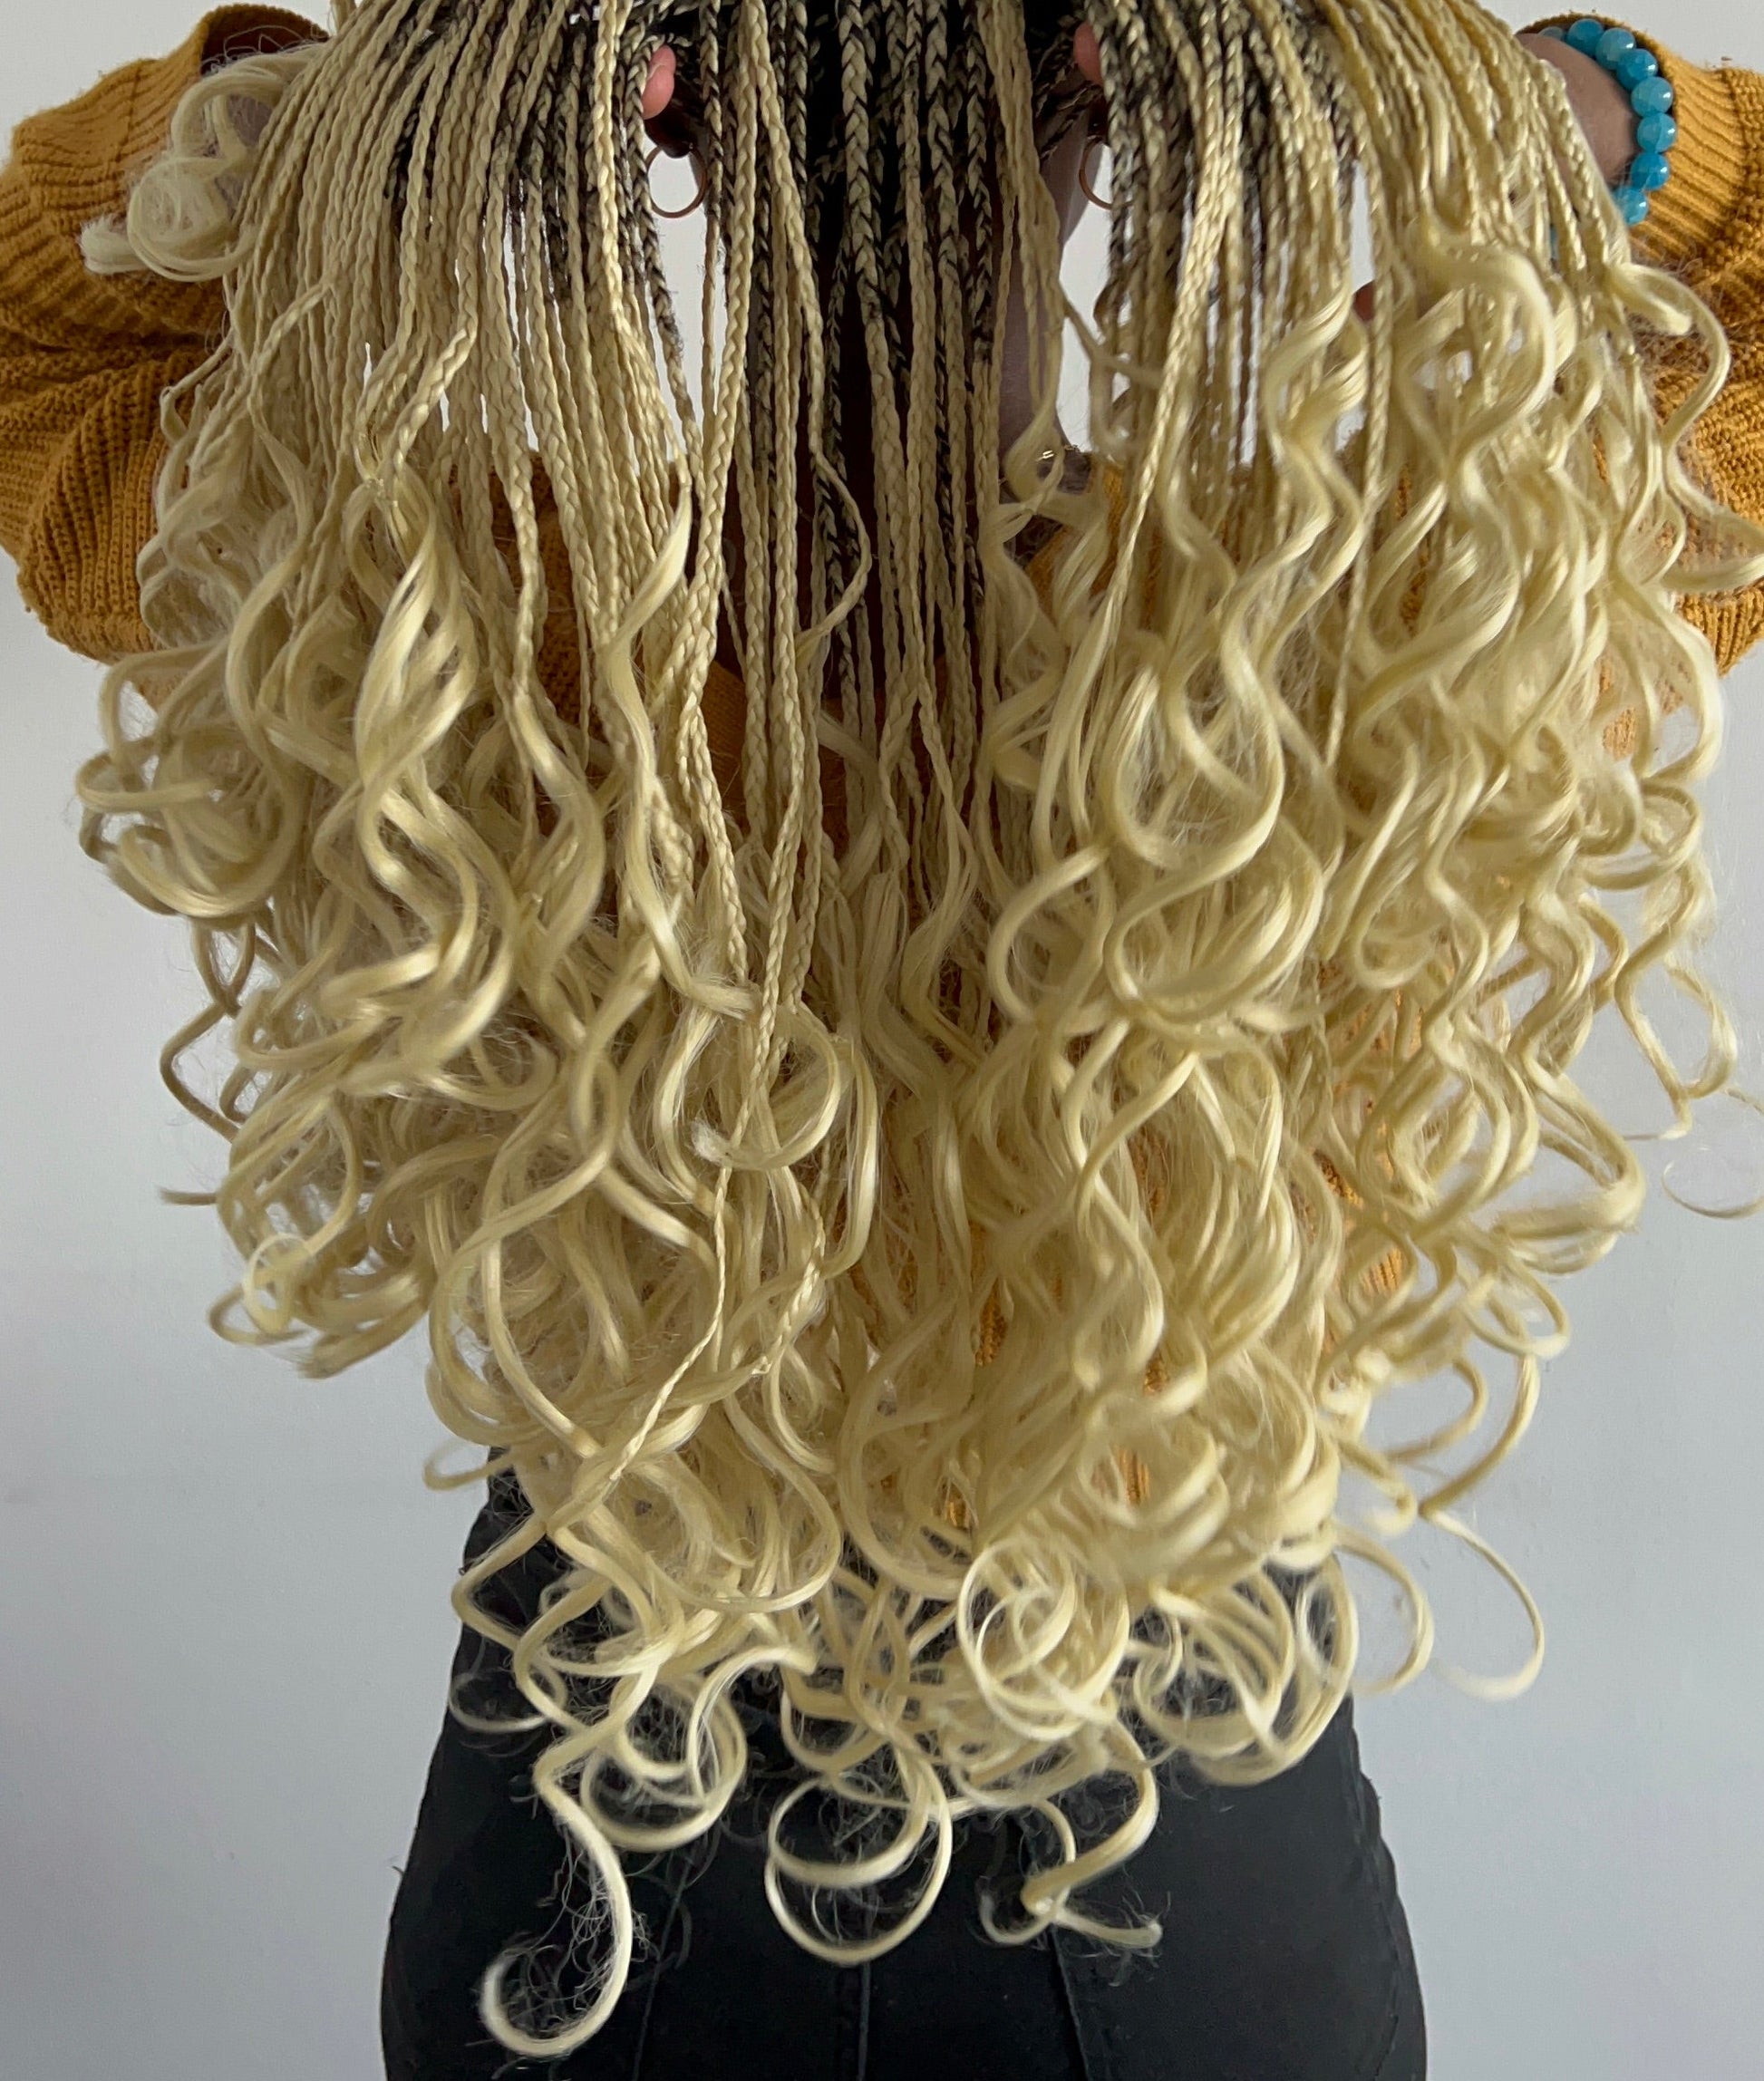 How Many Packs Of French Curl Braids Do I Need? – Lush Strands Studio